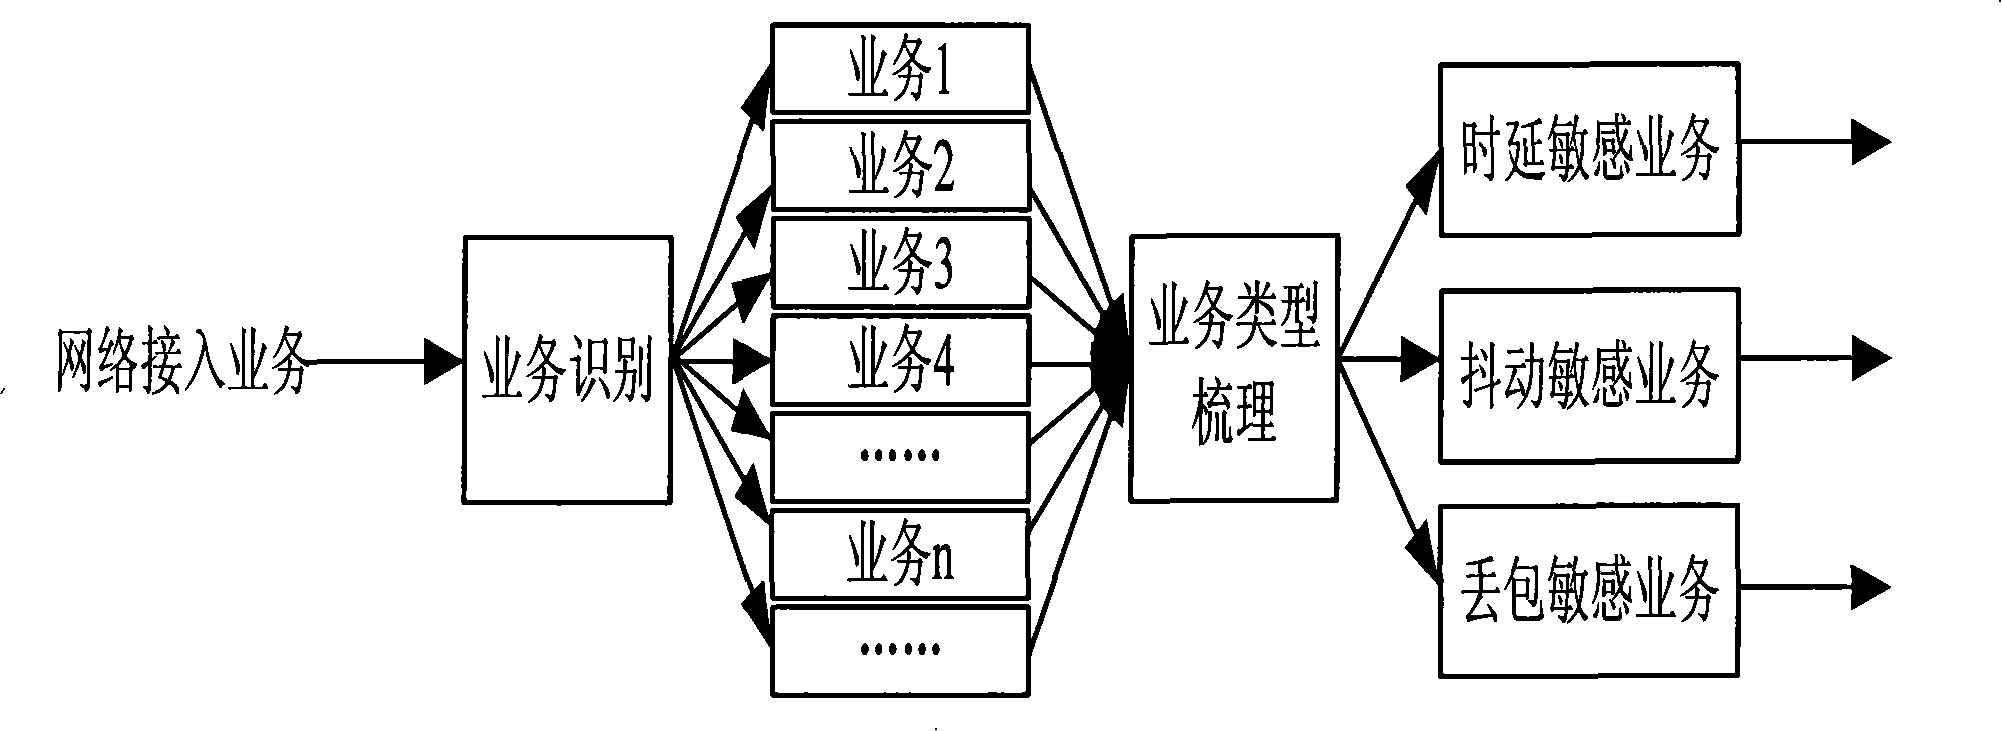 Route selection method for intelligent self-perception optical network base on network status